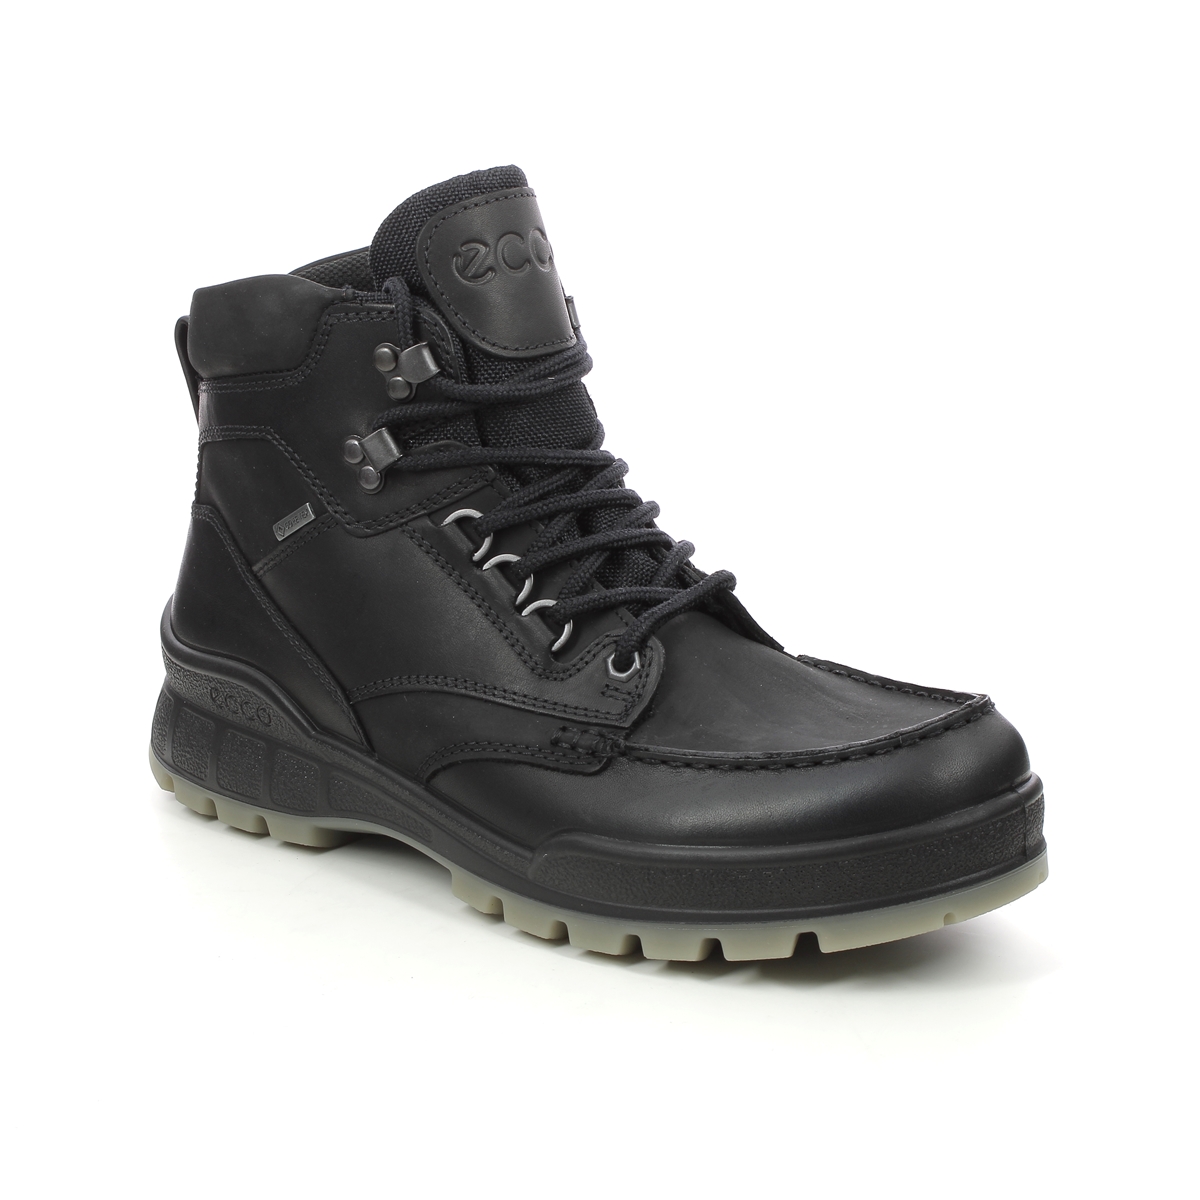 Ecco Track 25 Boot Gtx Black Leather Mens Outdoor Walking Boots 831704-51052 In Size 44 In Plain Black Leather